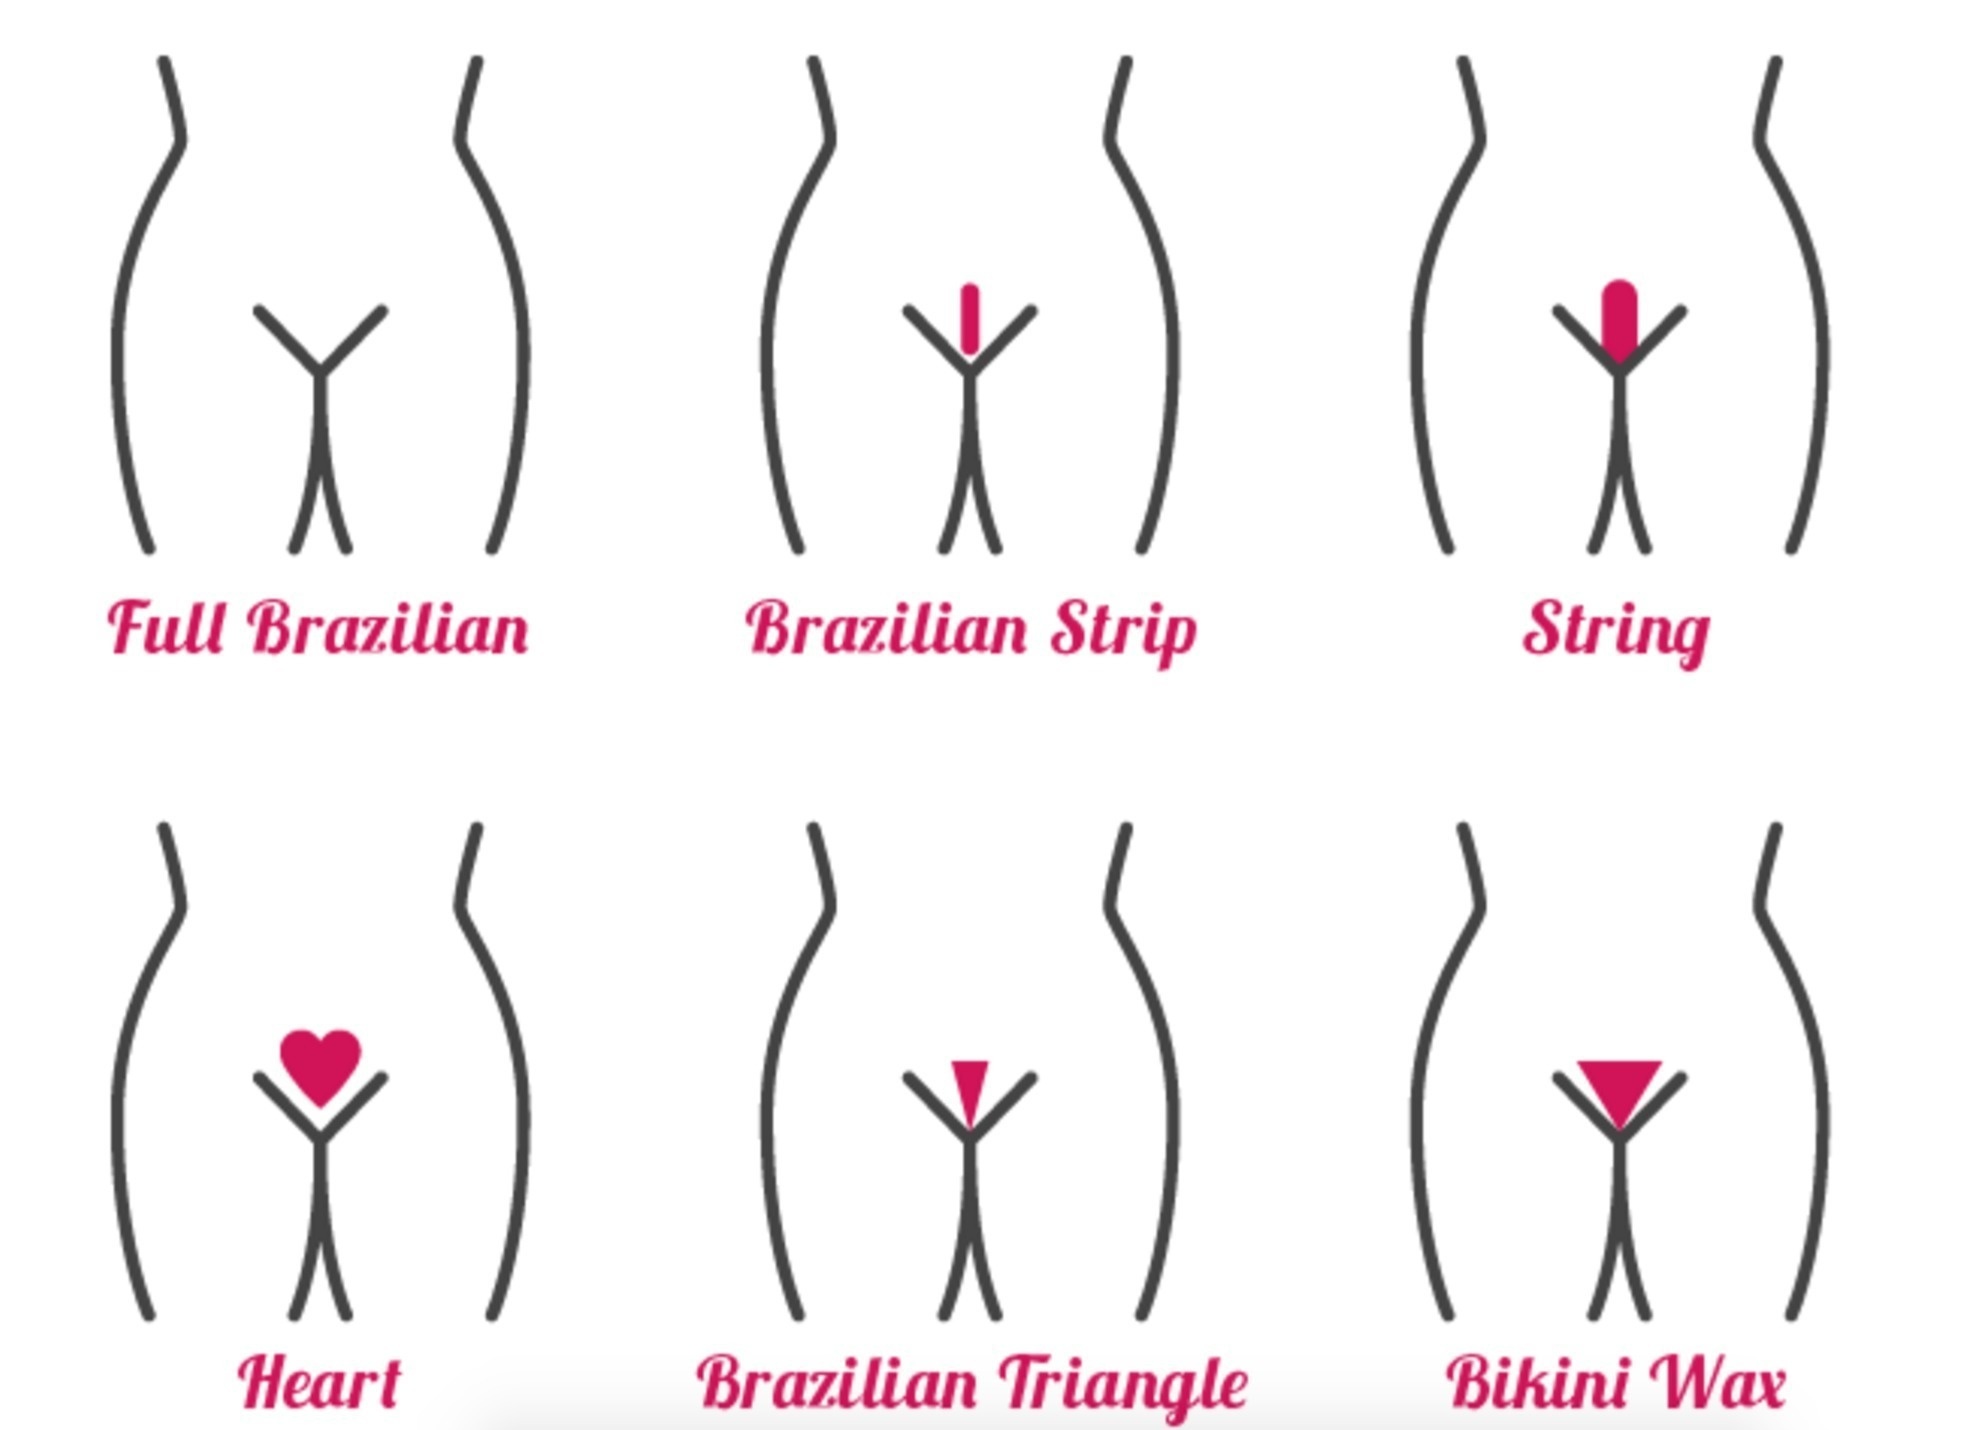 Whats Your Favorite Pubic Hair Style Pics Romance Nigeria